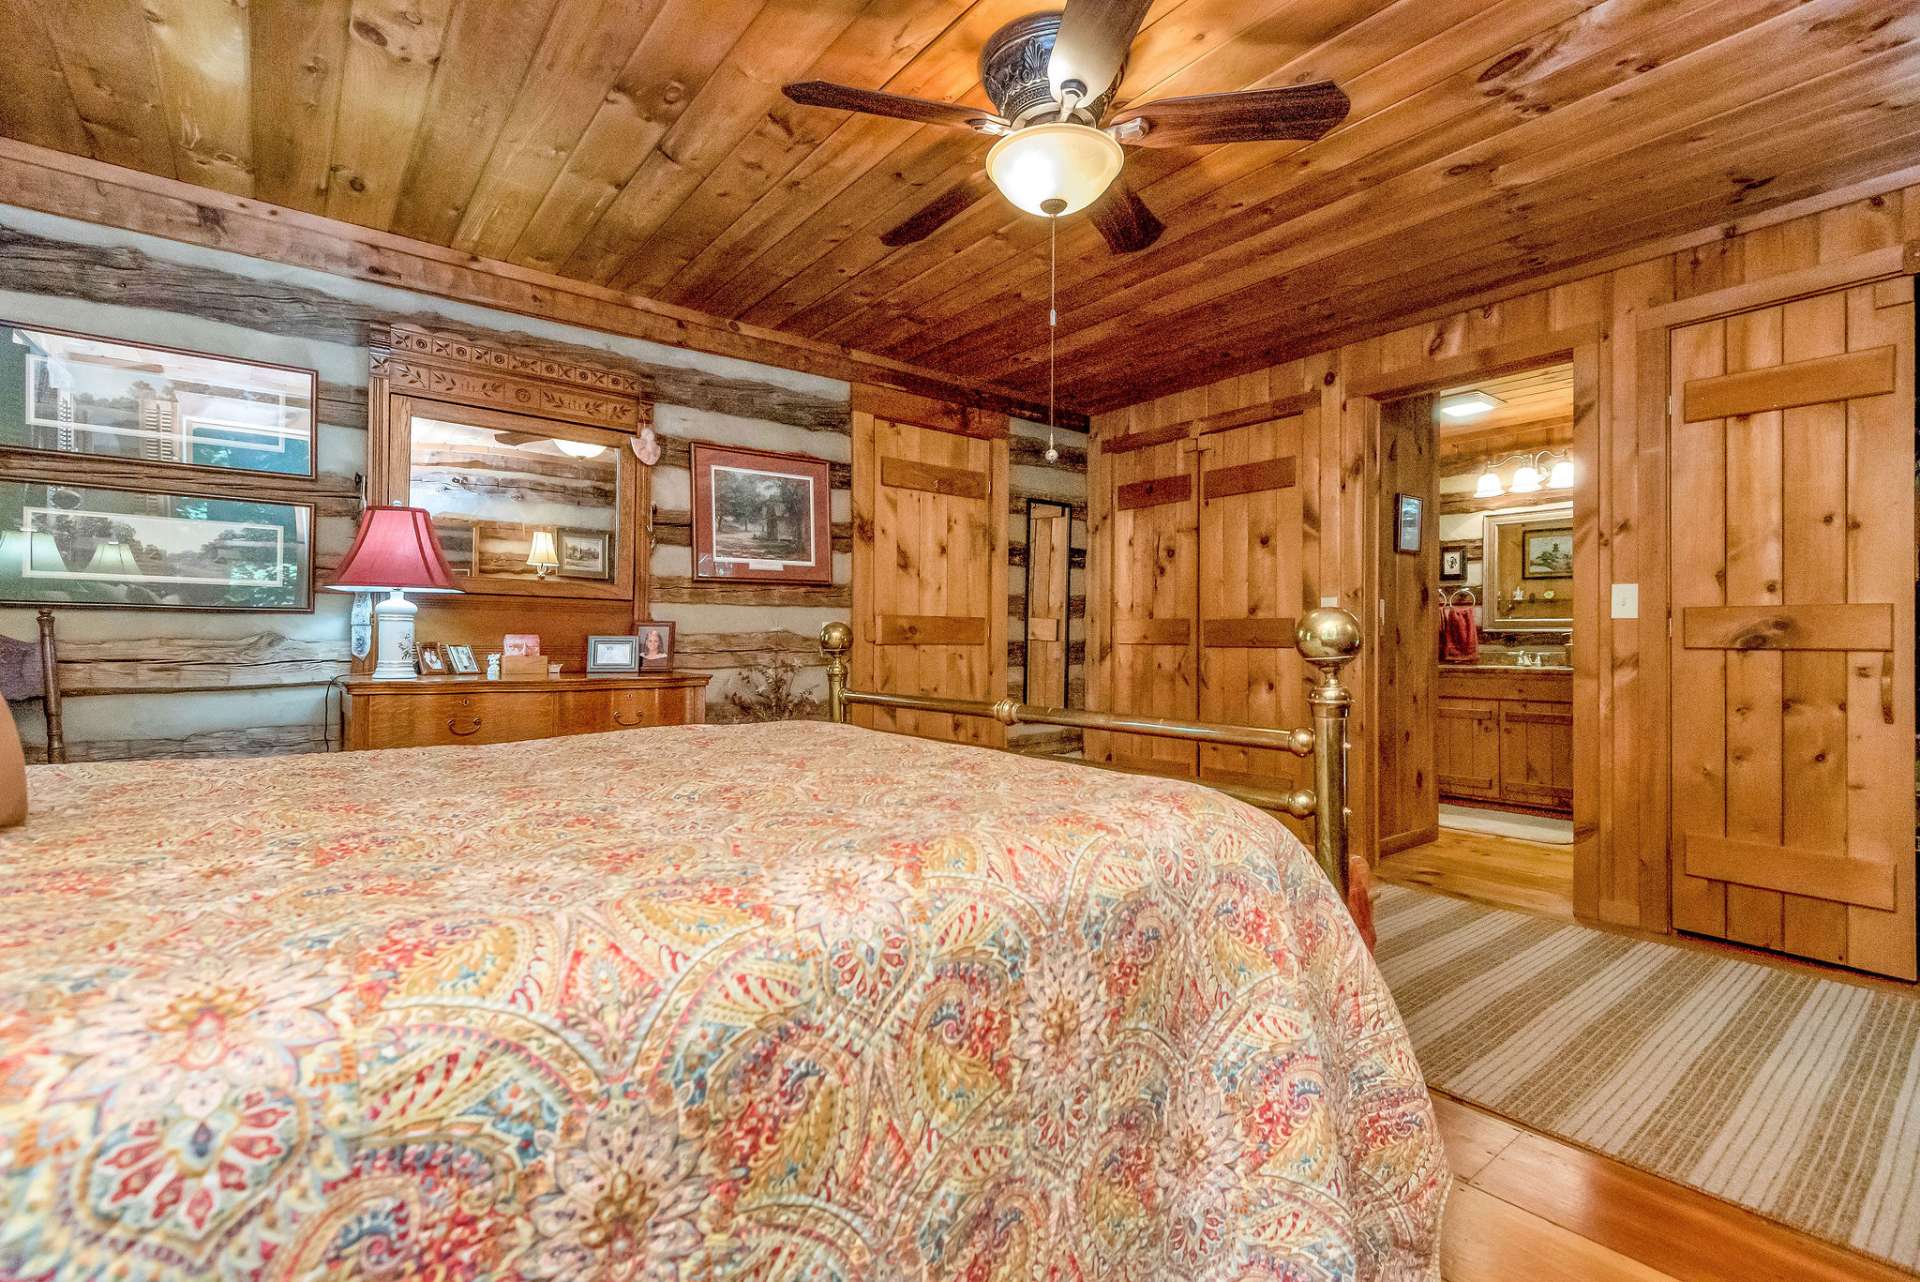 The antique logs and wood accents keep the rustic ambiance throughout the home.